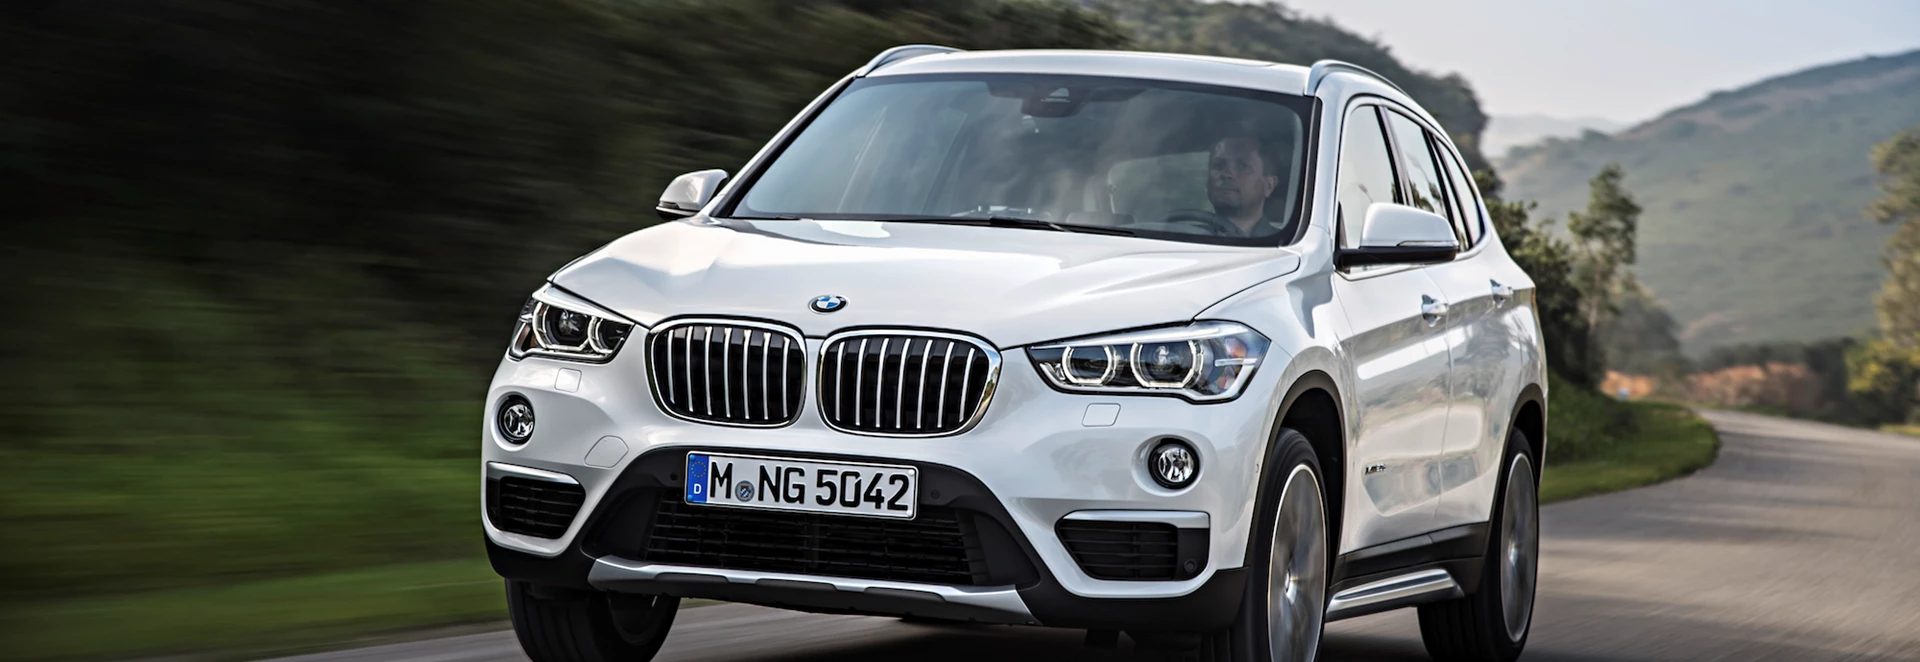 2018 BMW X1 review